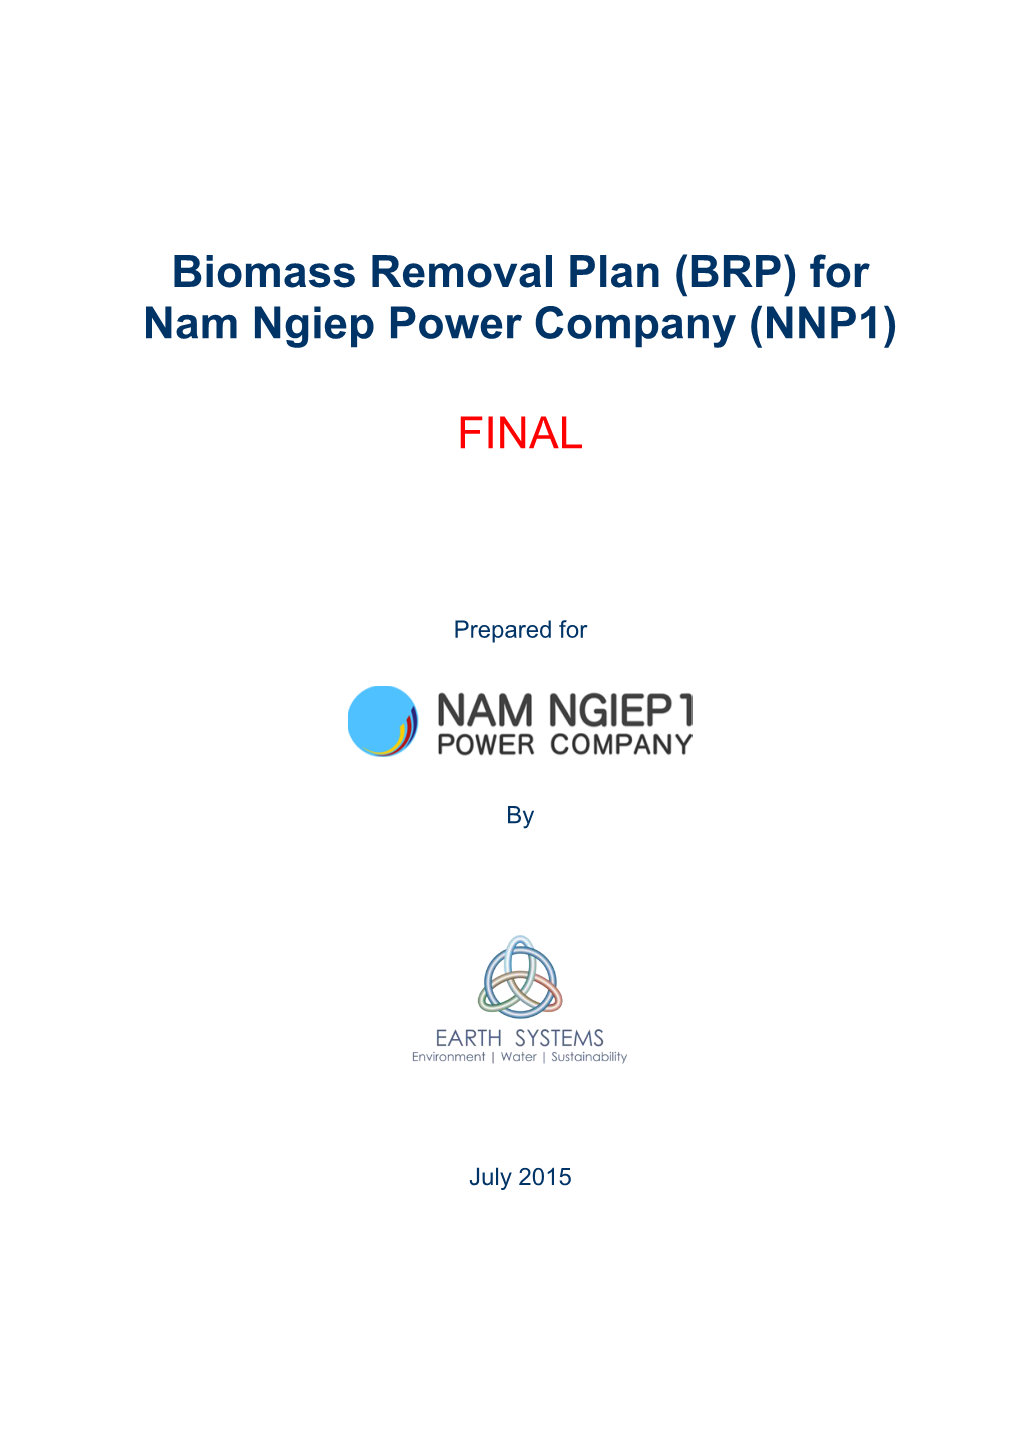 Biomass Removal Plan (BRP) For